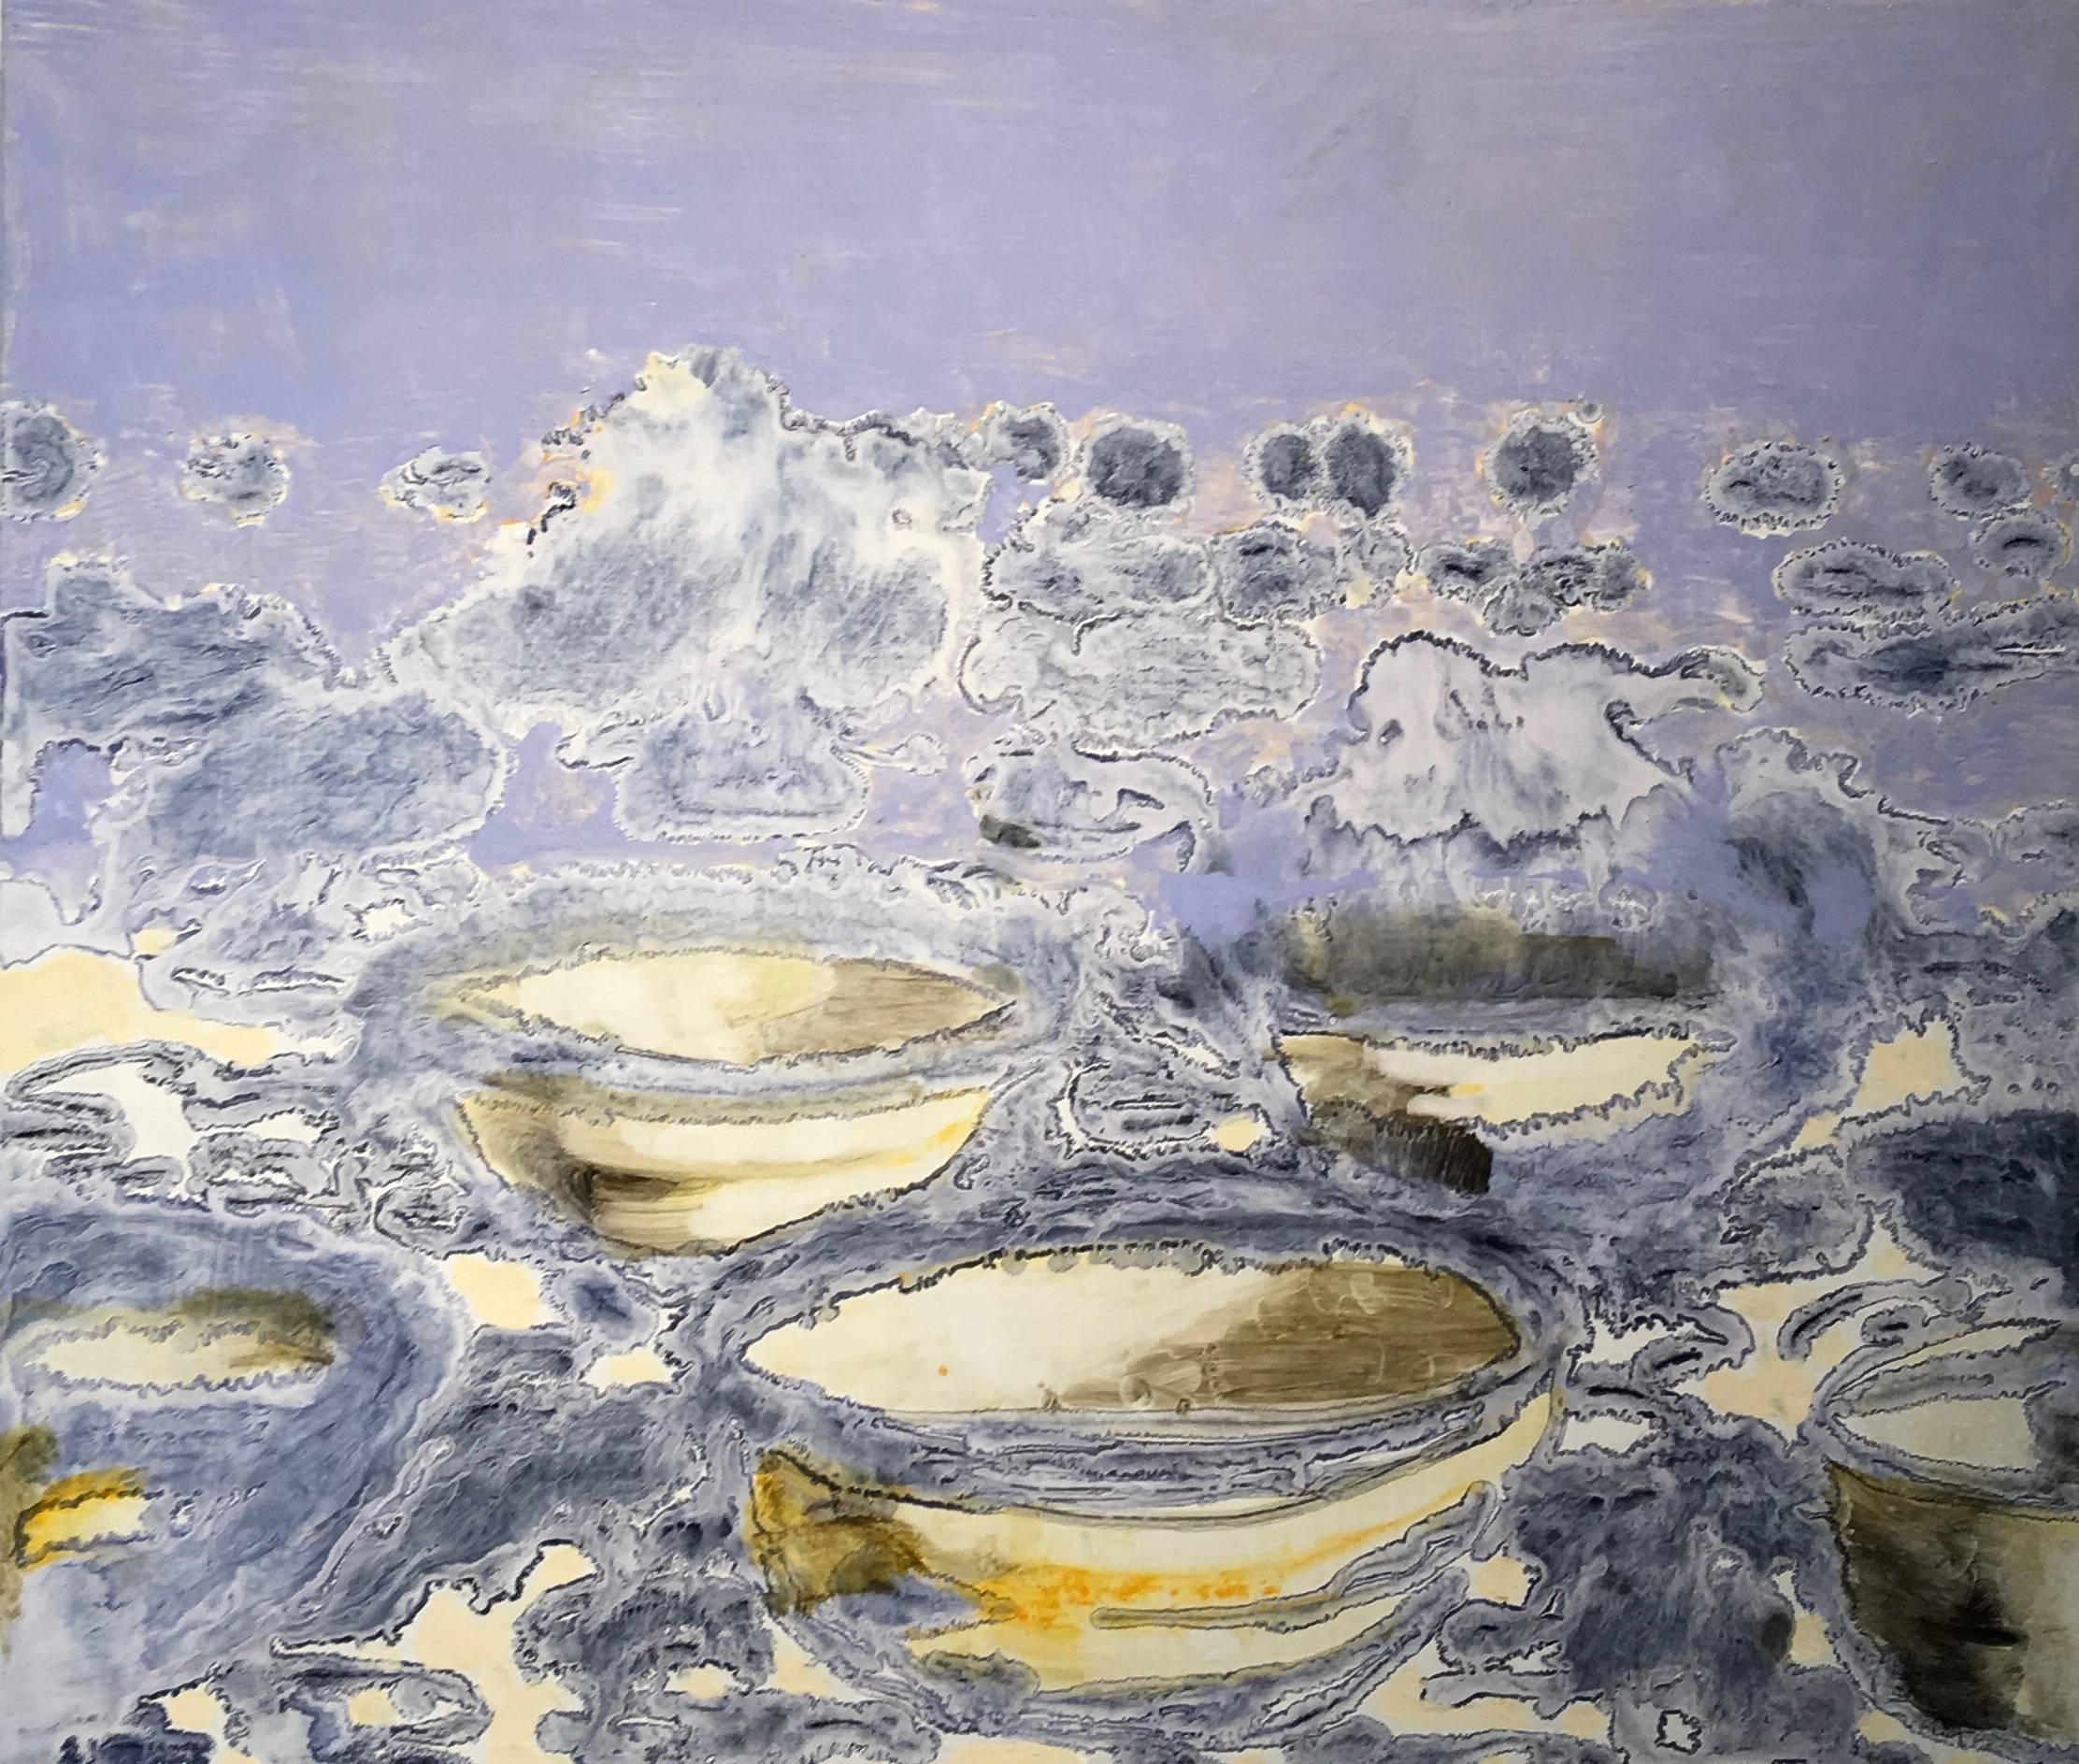 David Konigsberg Landscape Painting - Bowls, Serene Purple Landscape Oil Painting with White Clouds and Yellow Flowers